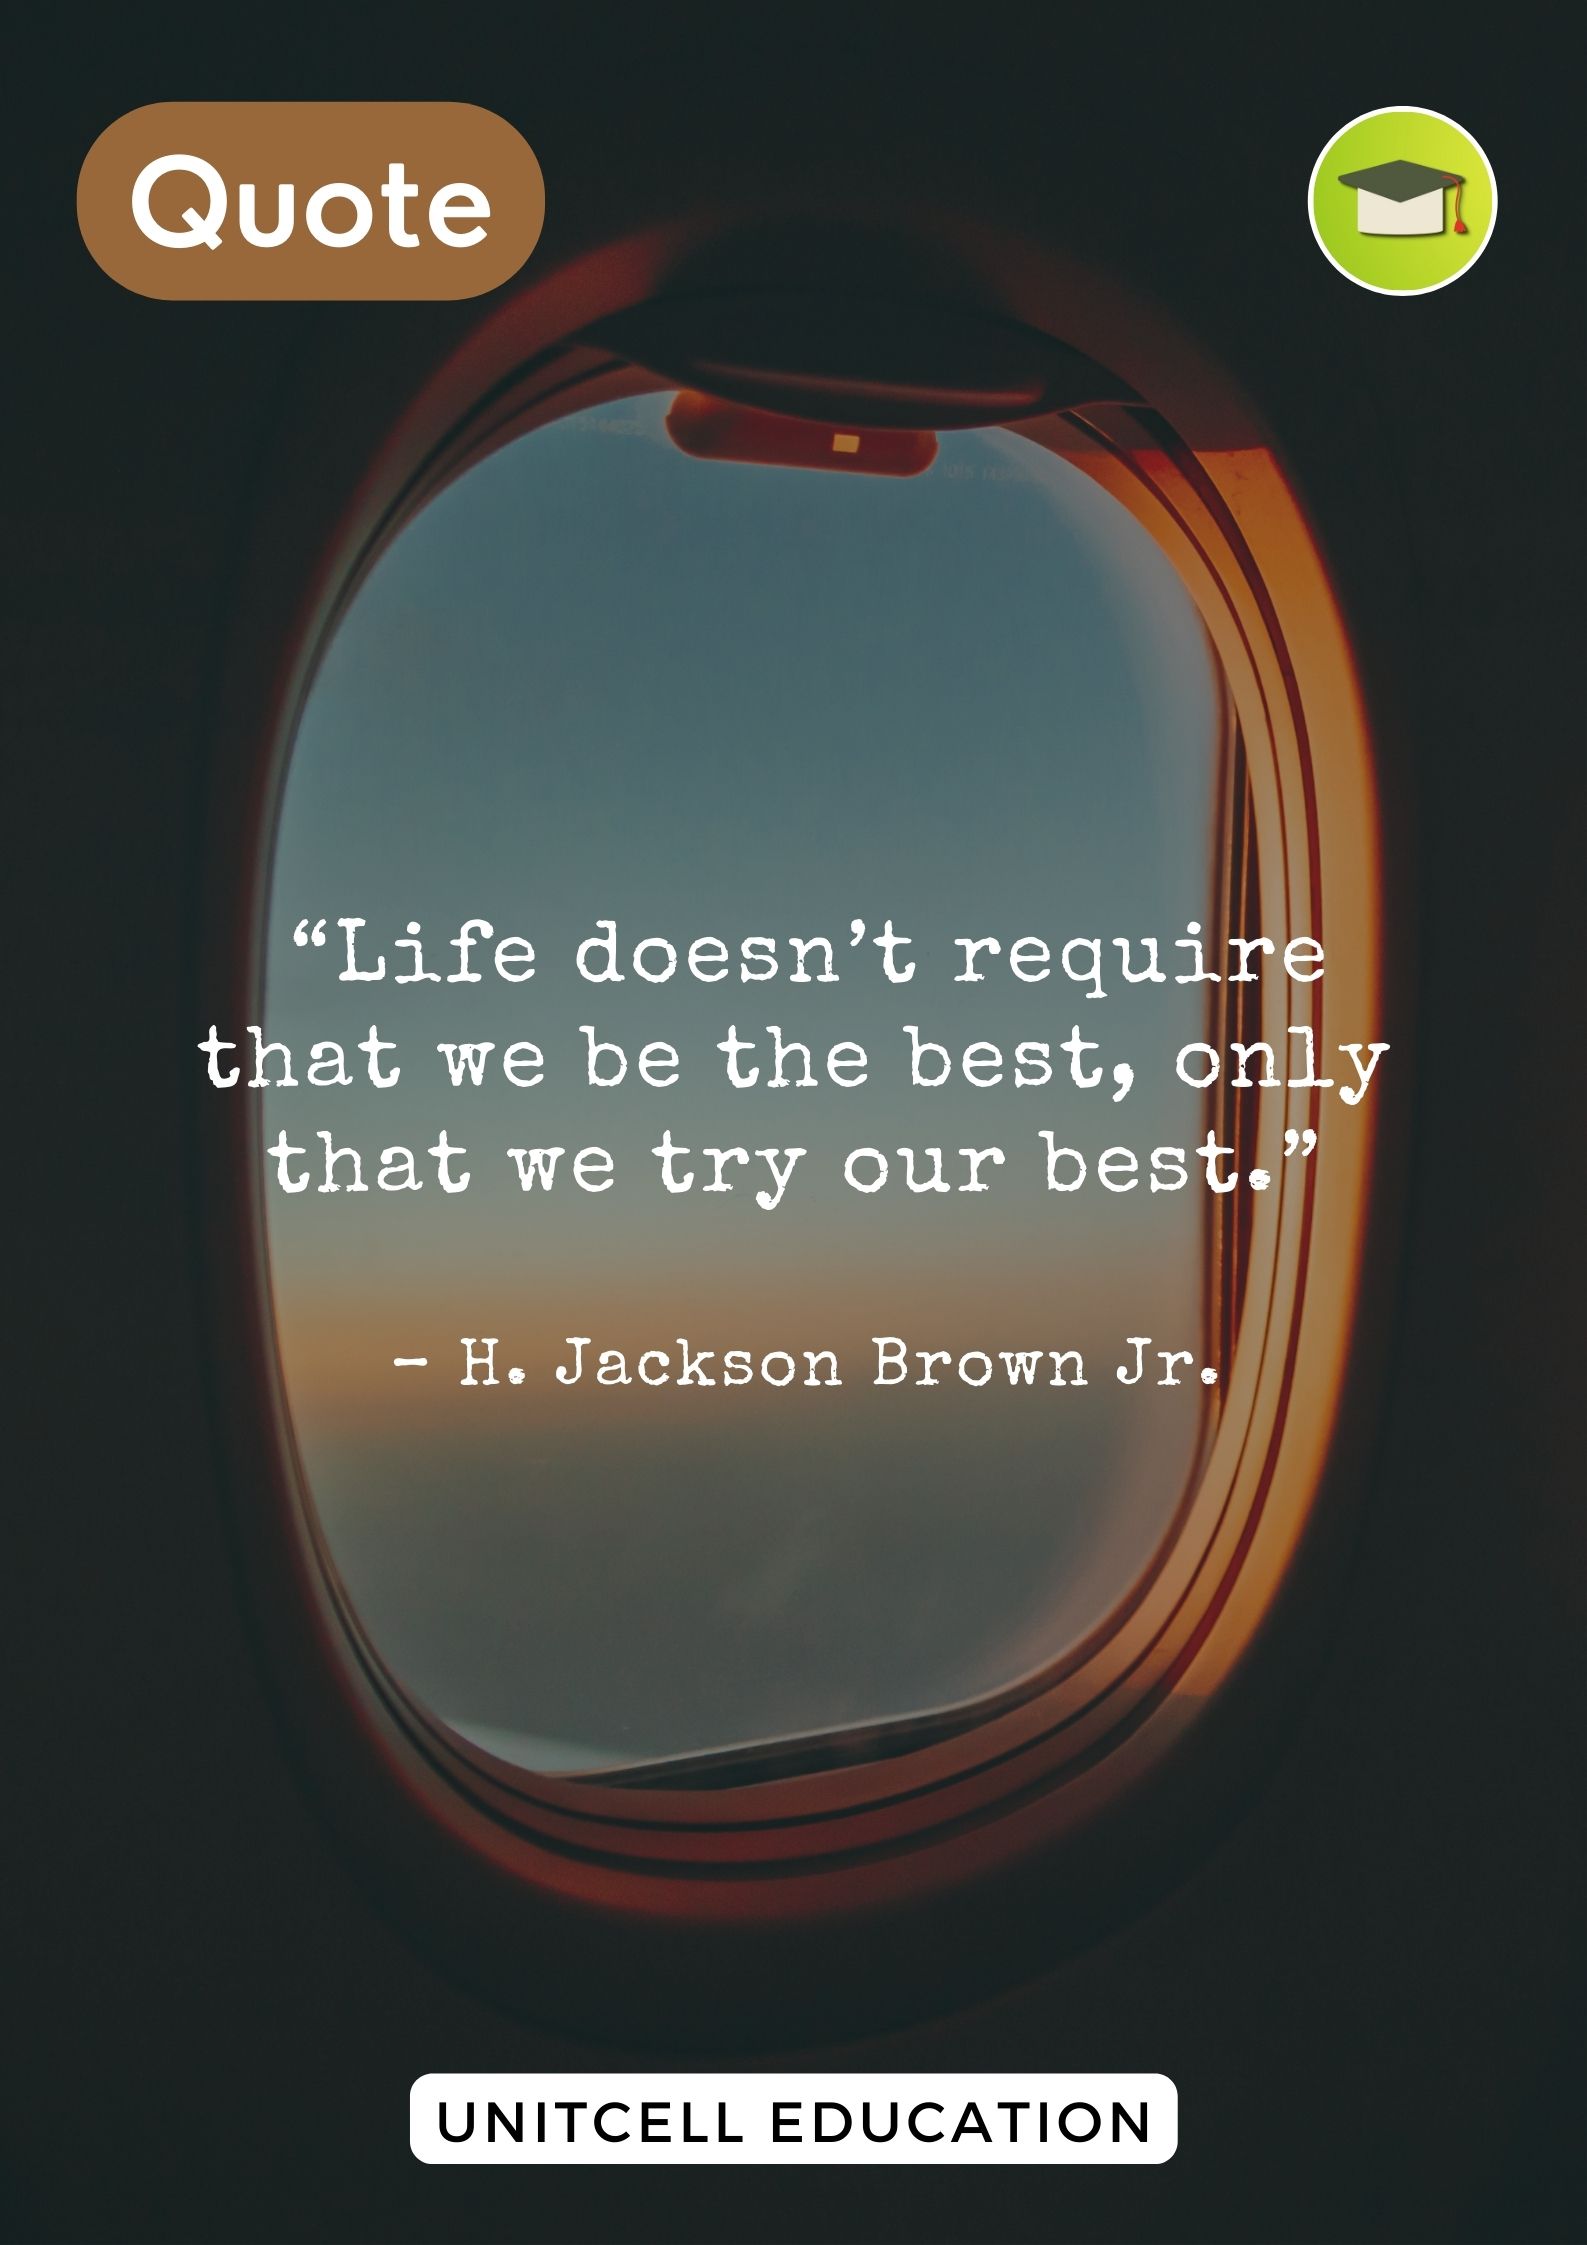 “Life doesn’t require that we be the best, only that we try our best.” - H. Jackson Brown Jr.